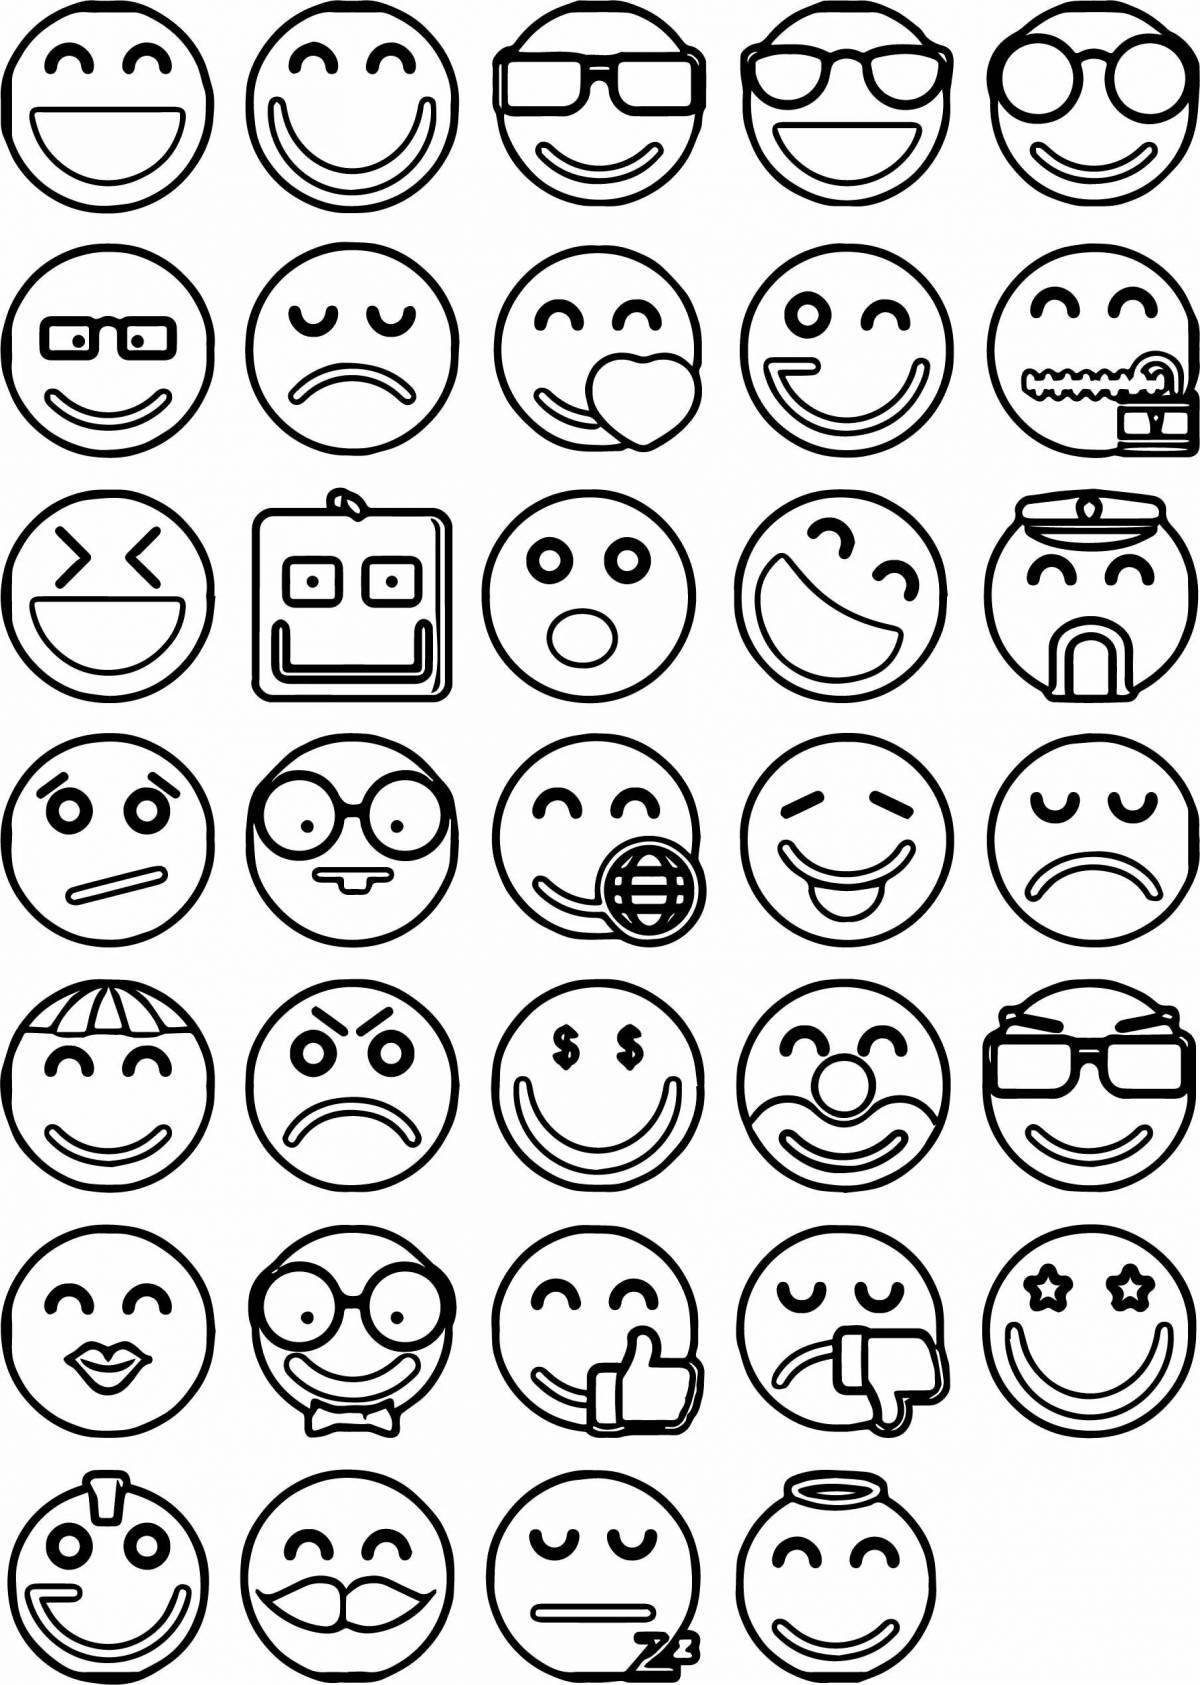 Radiant coloring page small emoticons for stickers